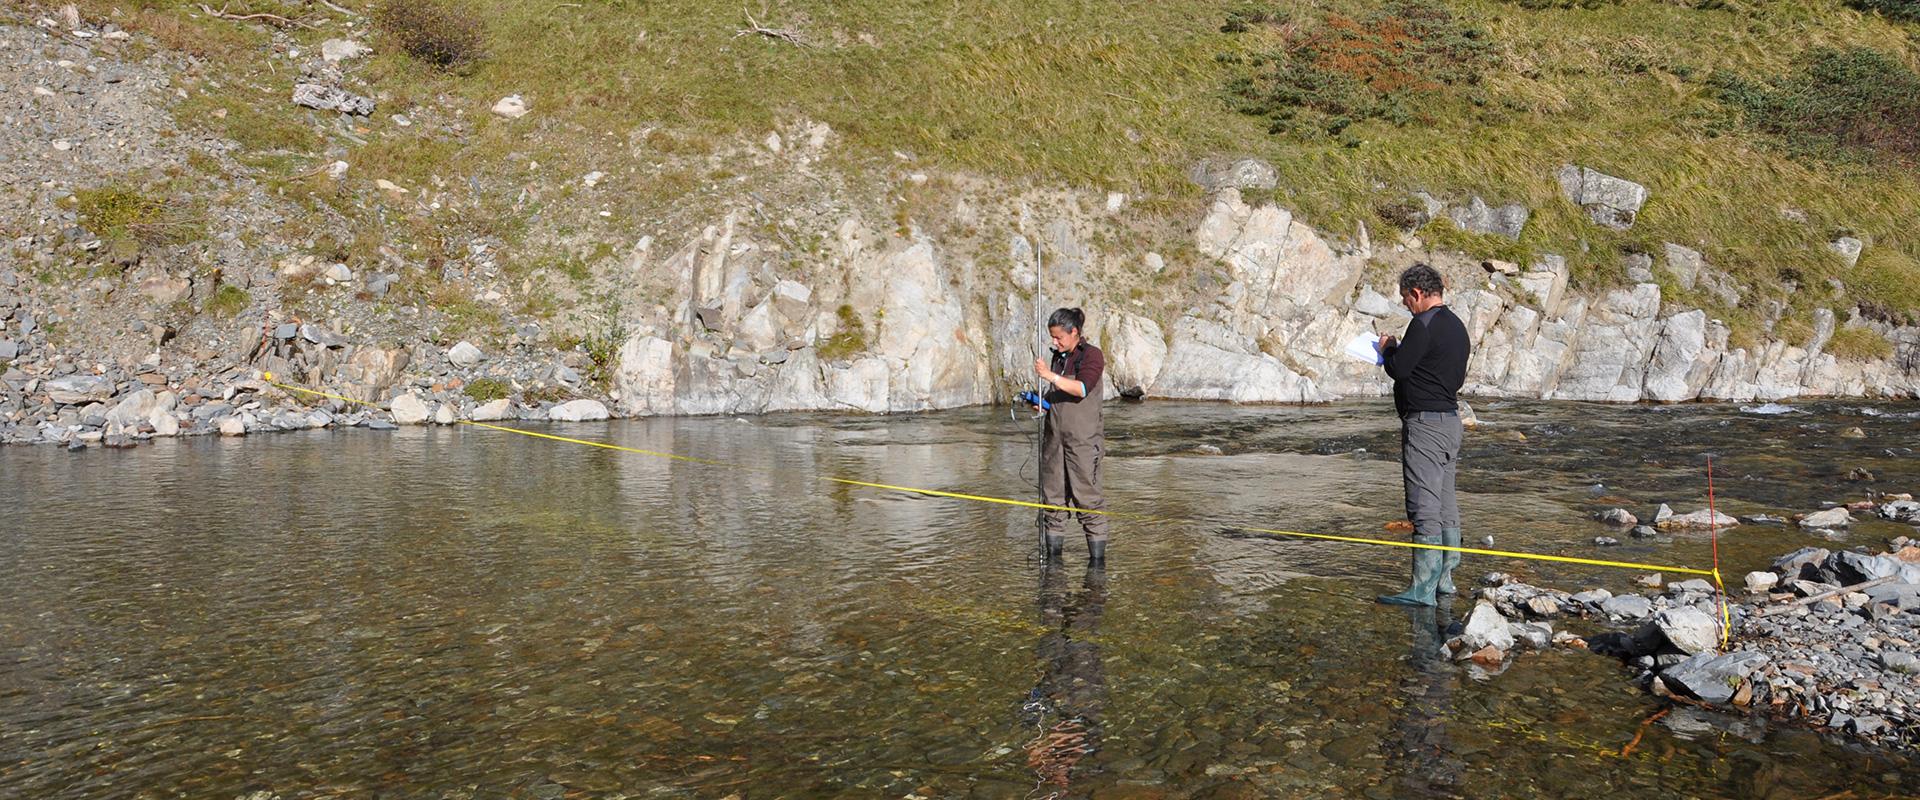 Measuring river flow at low-water level 2015, Cauterets